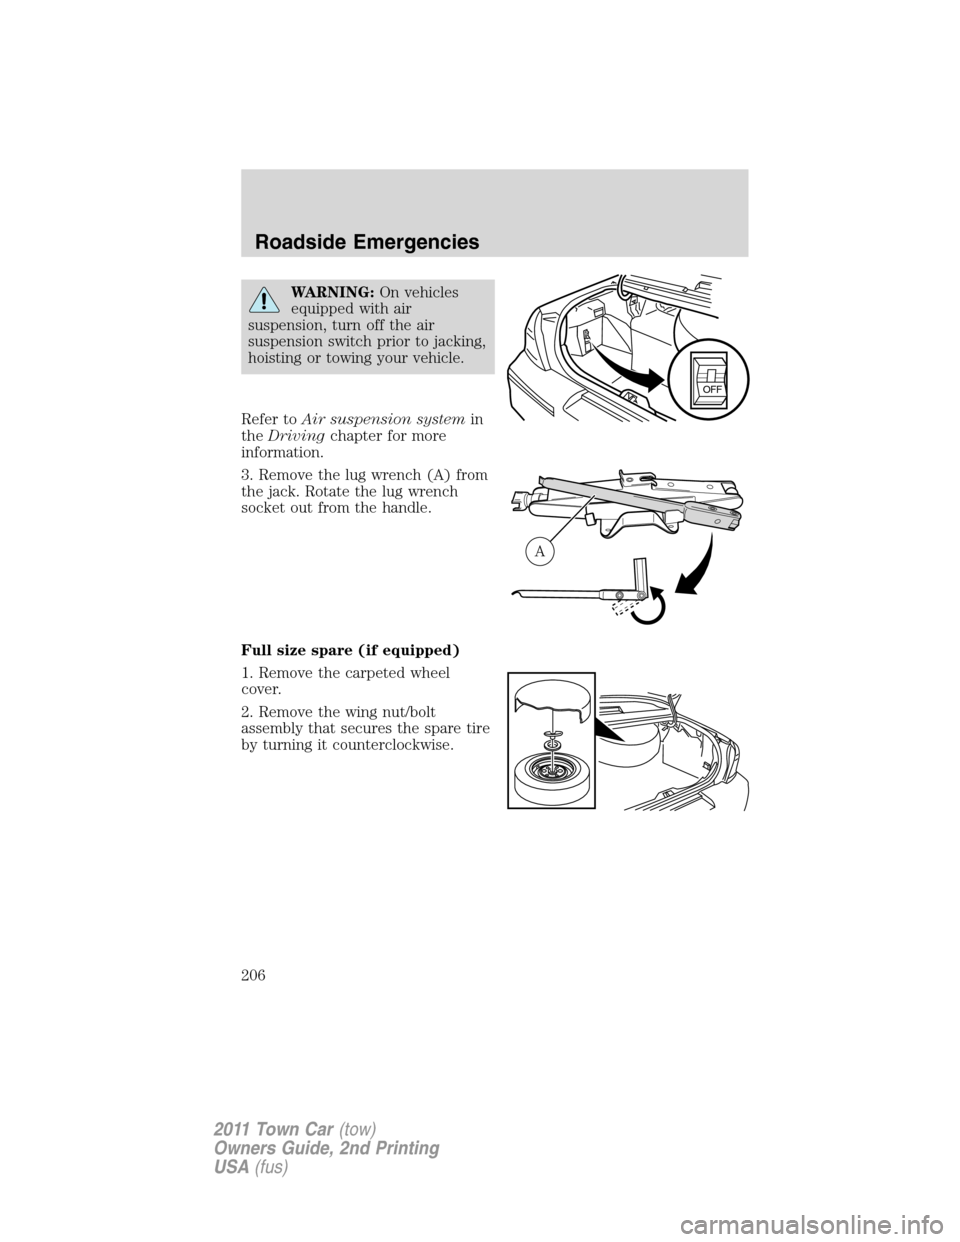 LINCOLN TOWN CAR 2011 User Guide WARNING:On vehicles
equipped with air
suspension, turn off the air
suspension switch prior to jacking,
hoisting or towing your vehicle.
Refer toAir suspension systemin
theDrivingchapter for more
infor